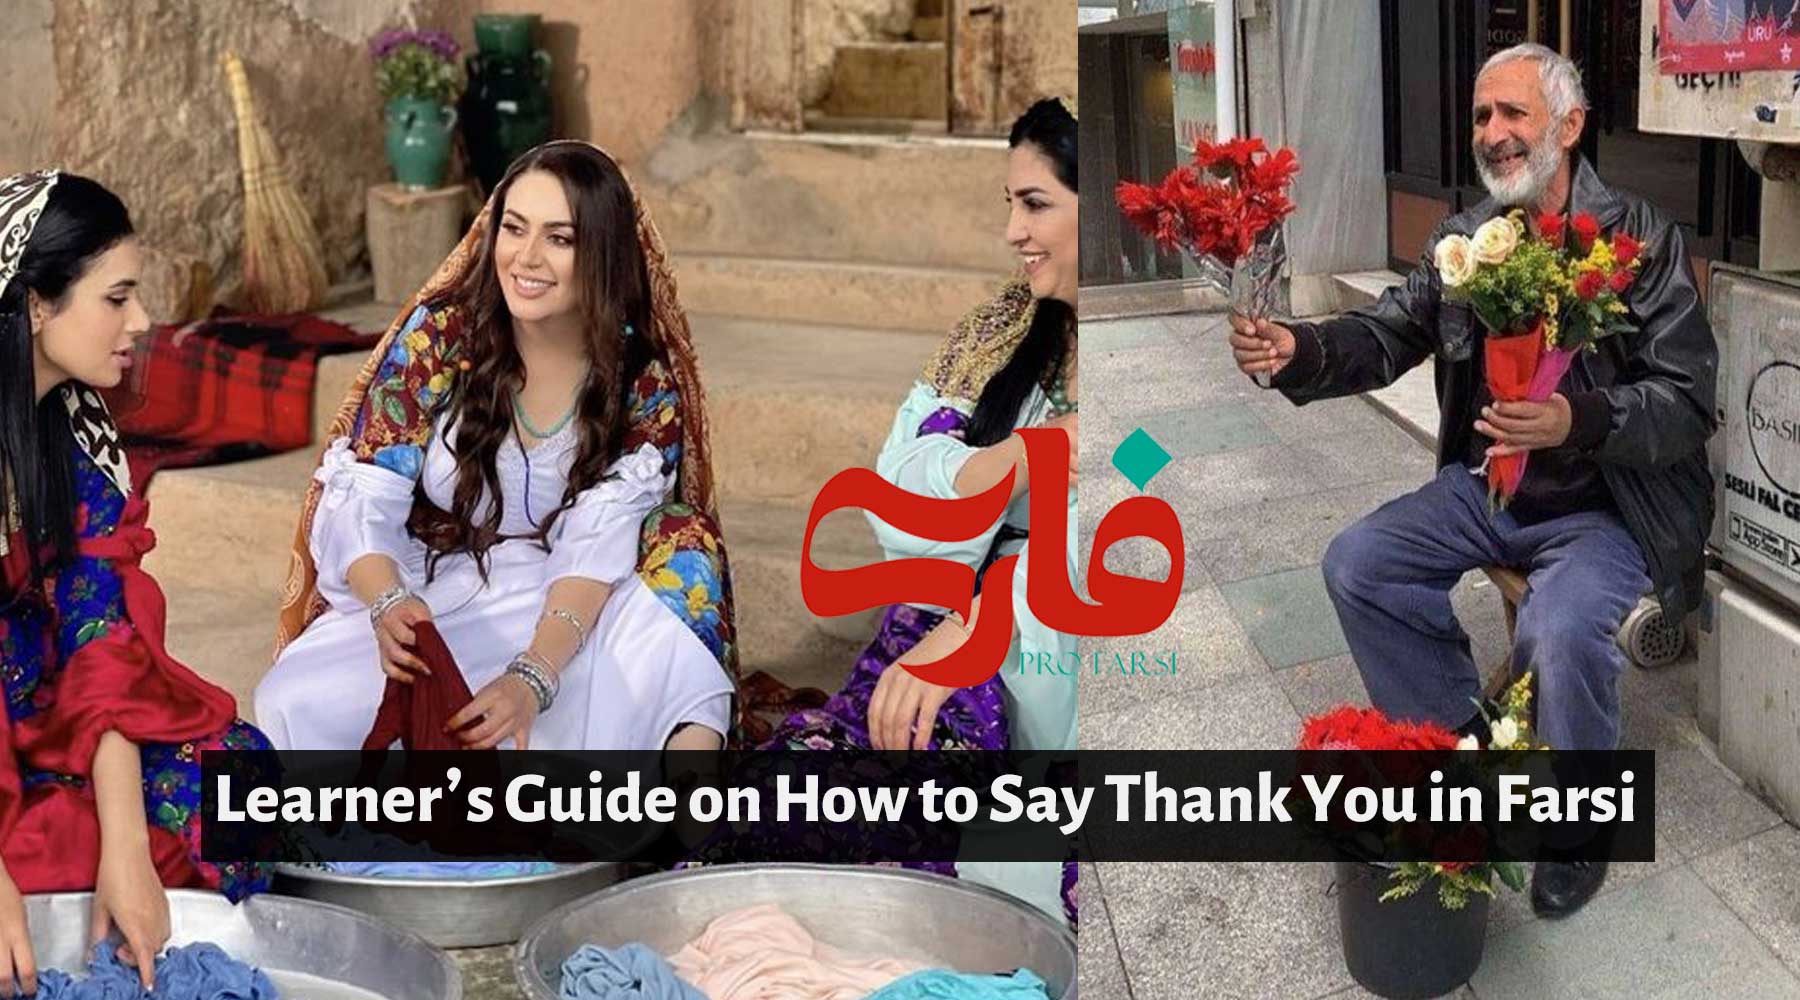 Learner's Guide on How to Say Thank You in Farsi